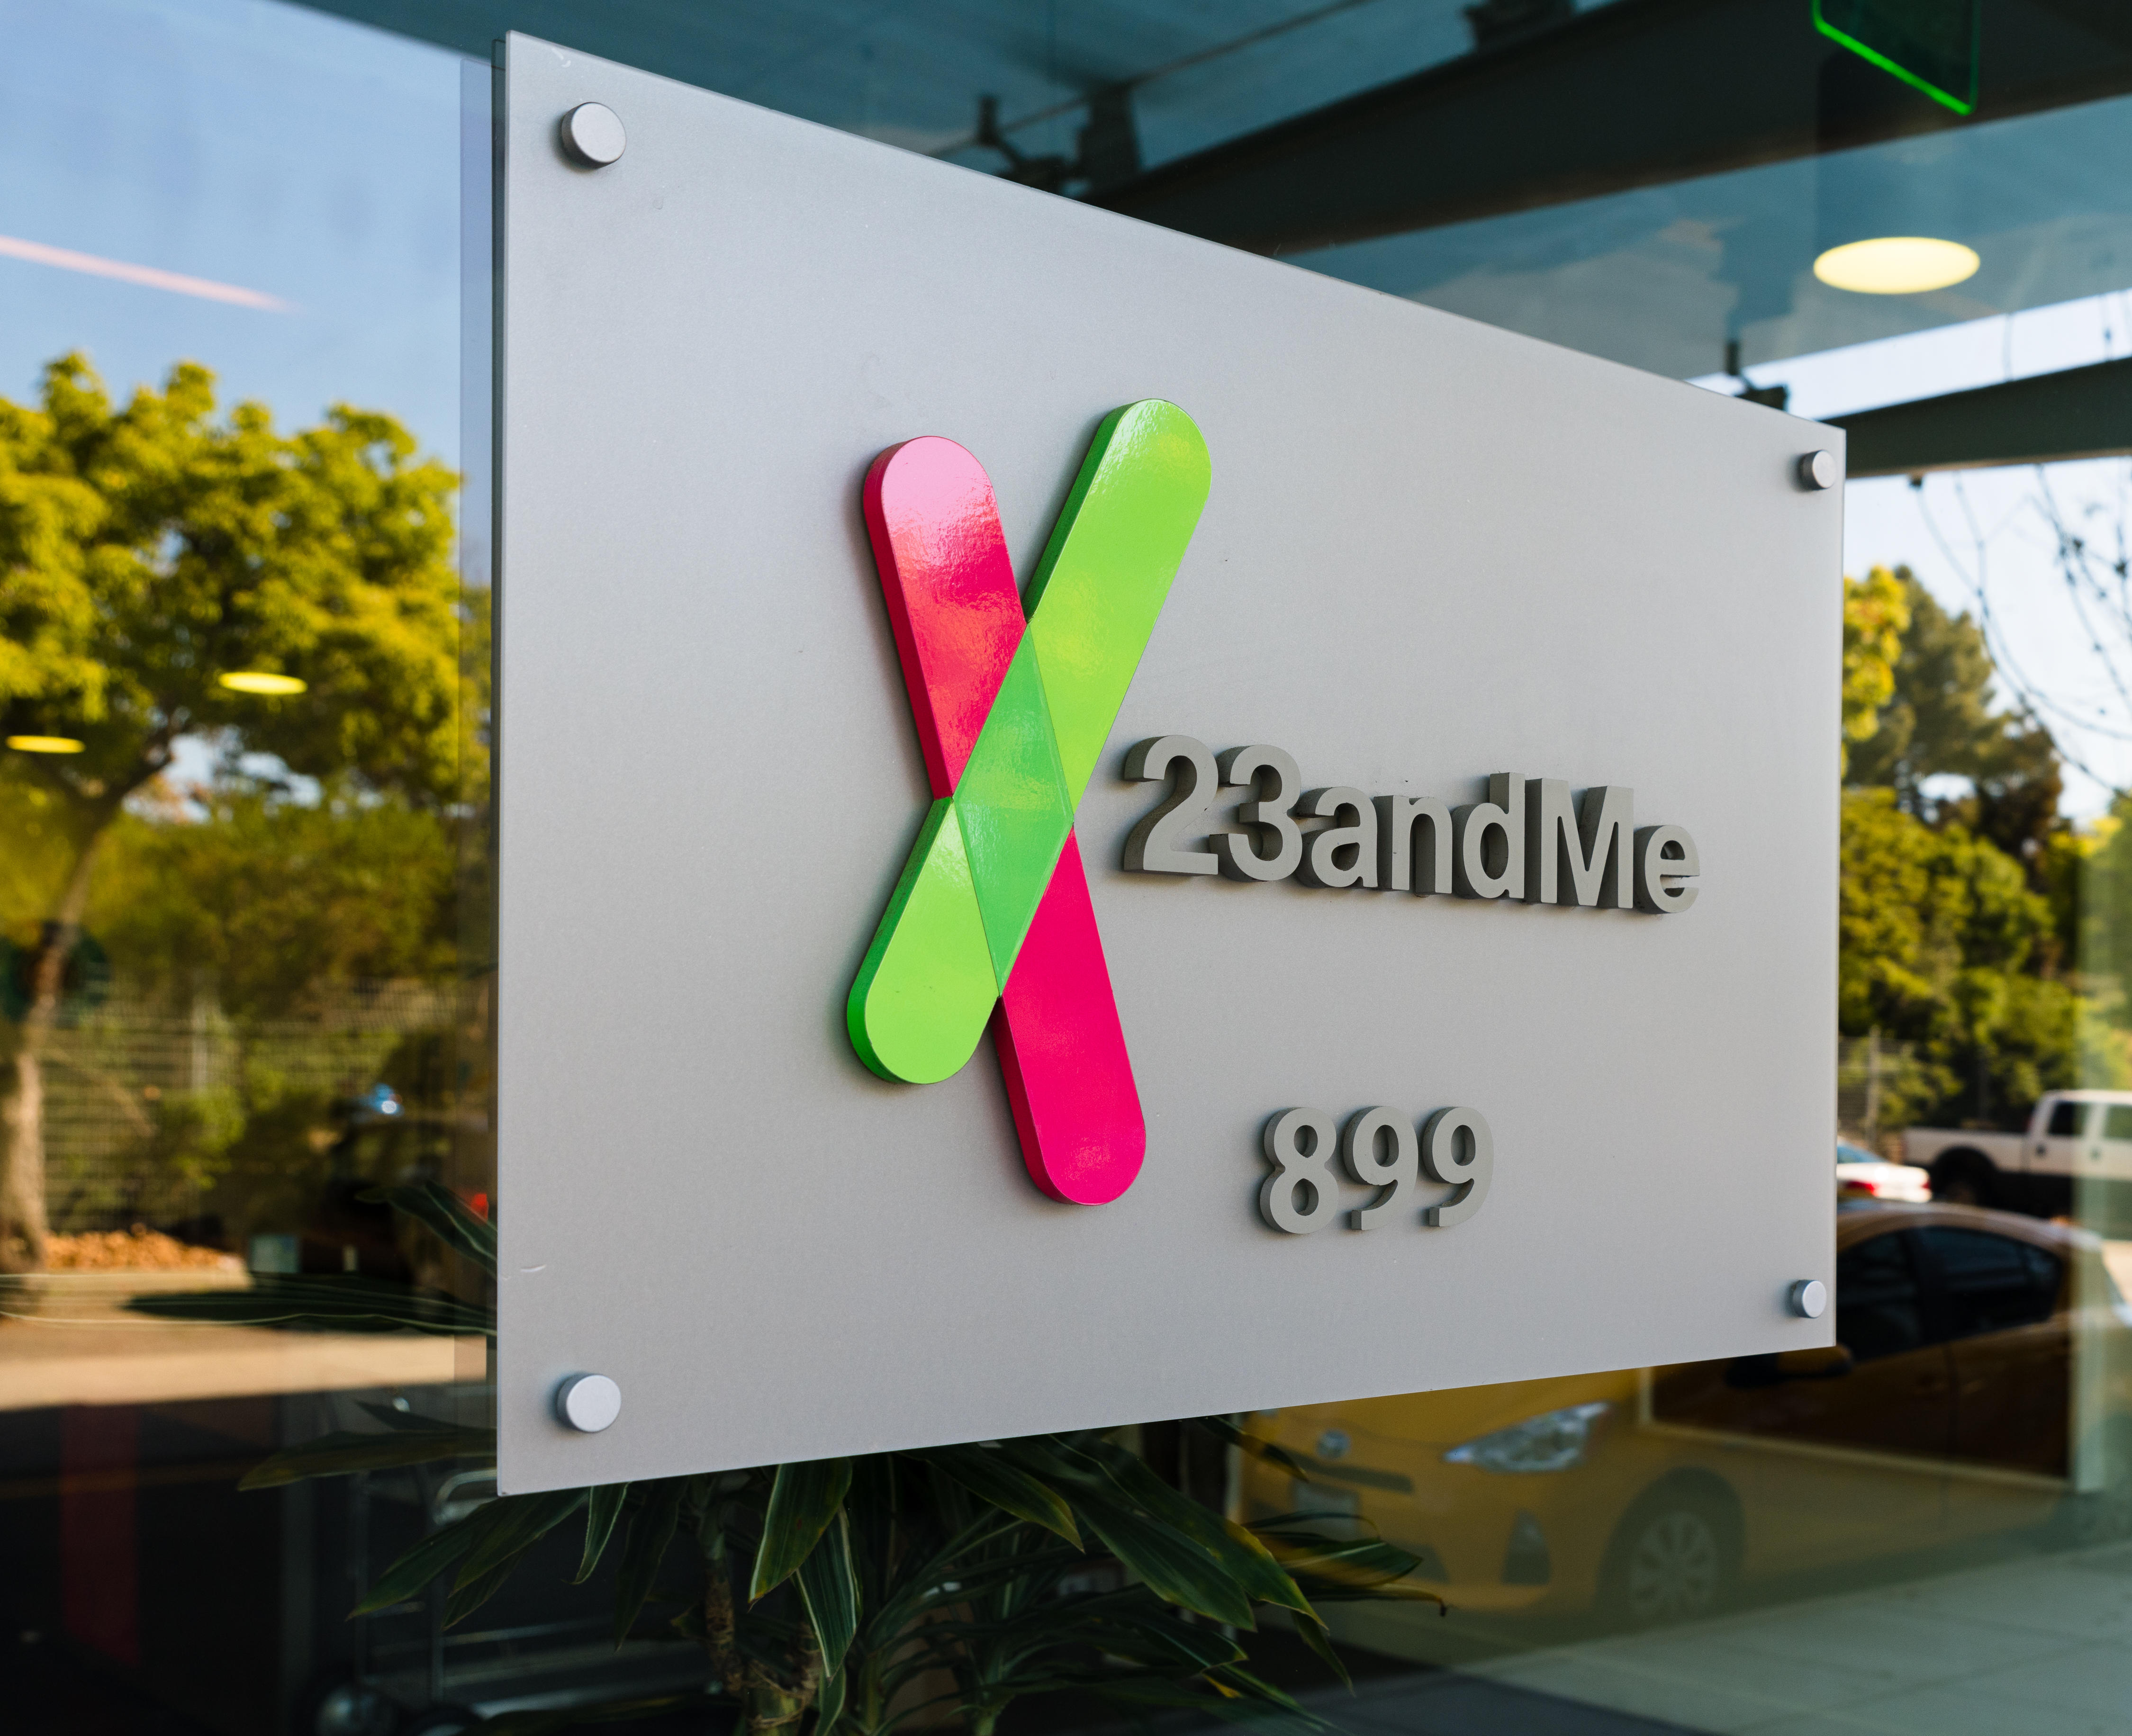 23andMe: 'Negligent' Users at Fault for Breach of 6.9M Records